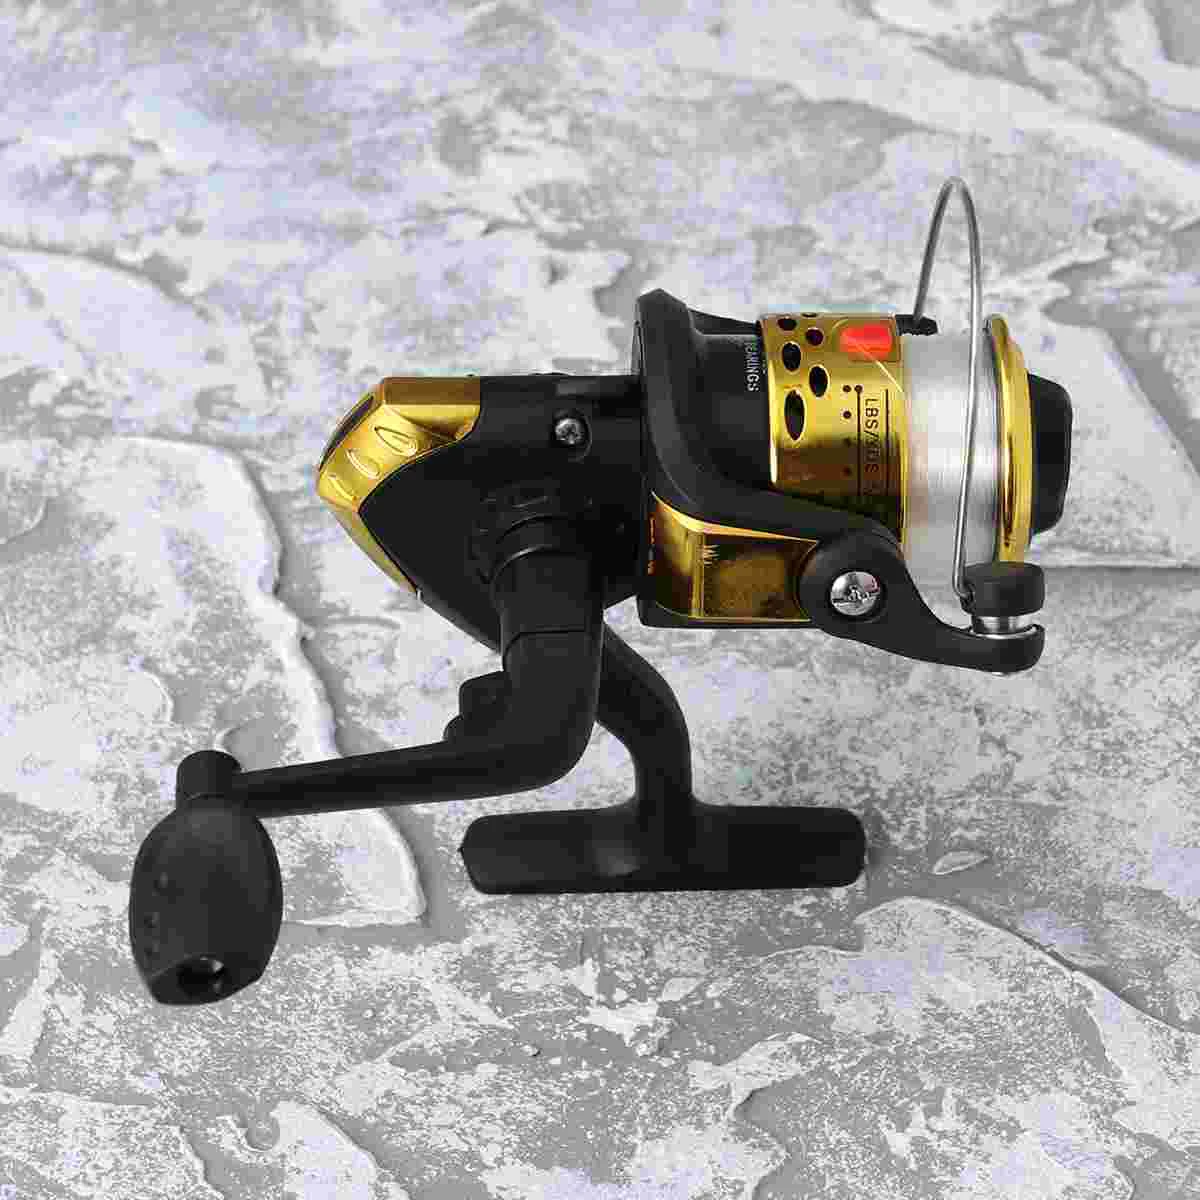 

200 Small Fishing Reel Aluminum Fishing Reel with Cable for Saltwater or Freshwater Fishing (Golden)